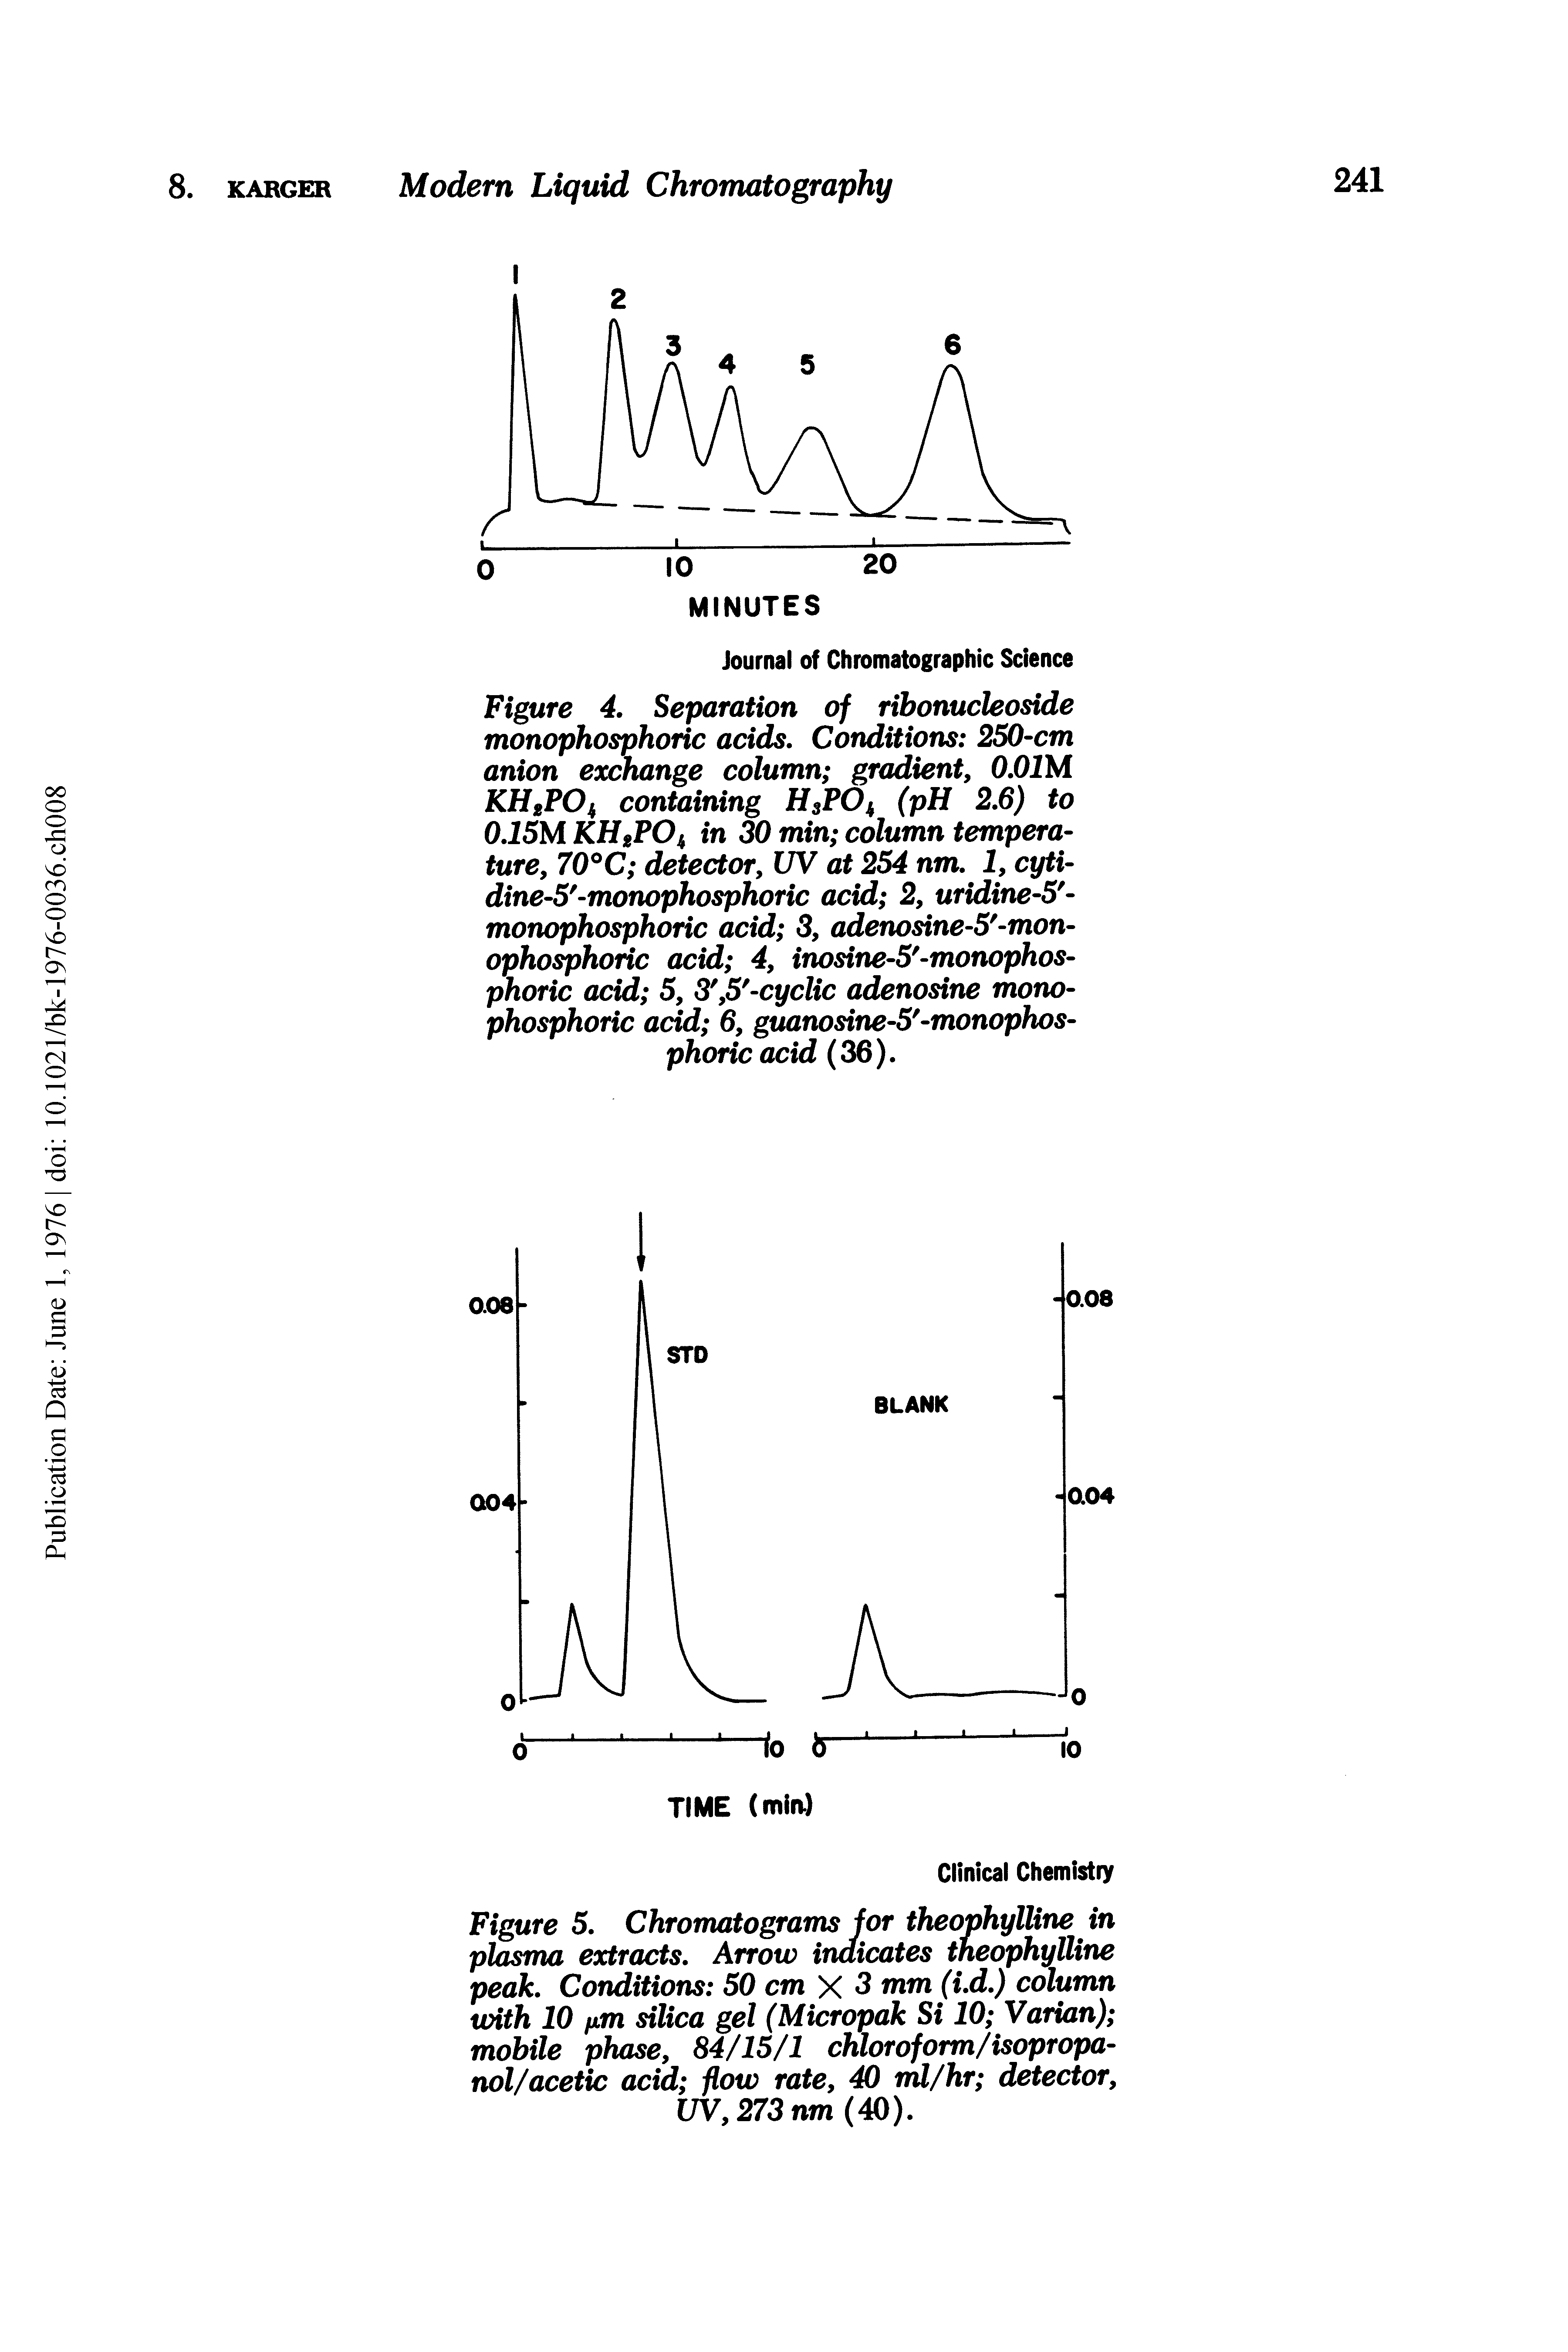 Figure 5. Chromatograms for theophylline in plasma extracts. Arrow indicates tneophyUine peak. Conditions 50 cm X 3 mm (i.d.) column with 10 fjm silica gel (Micropak Si 10 Varian) mobile phase, 84/15/1 chloroform/isopropanol/acetic acid flow rate, 40 rm/hr detector, UV,273nm(40).